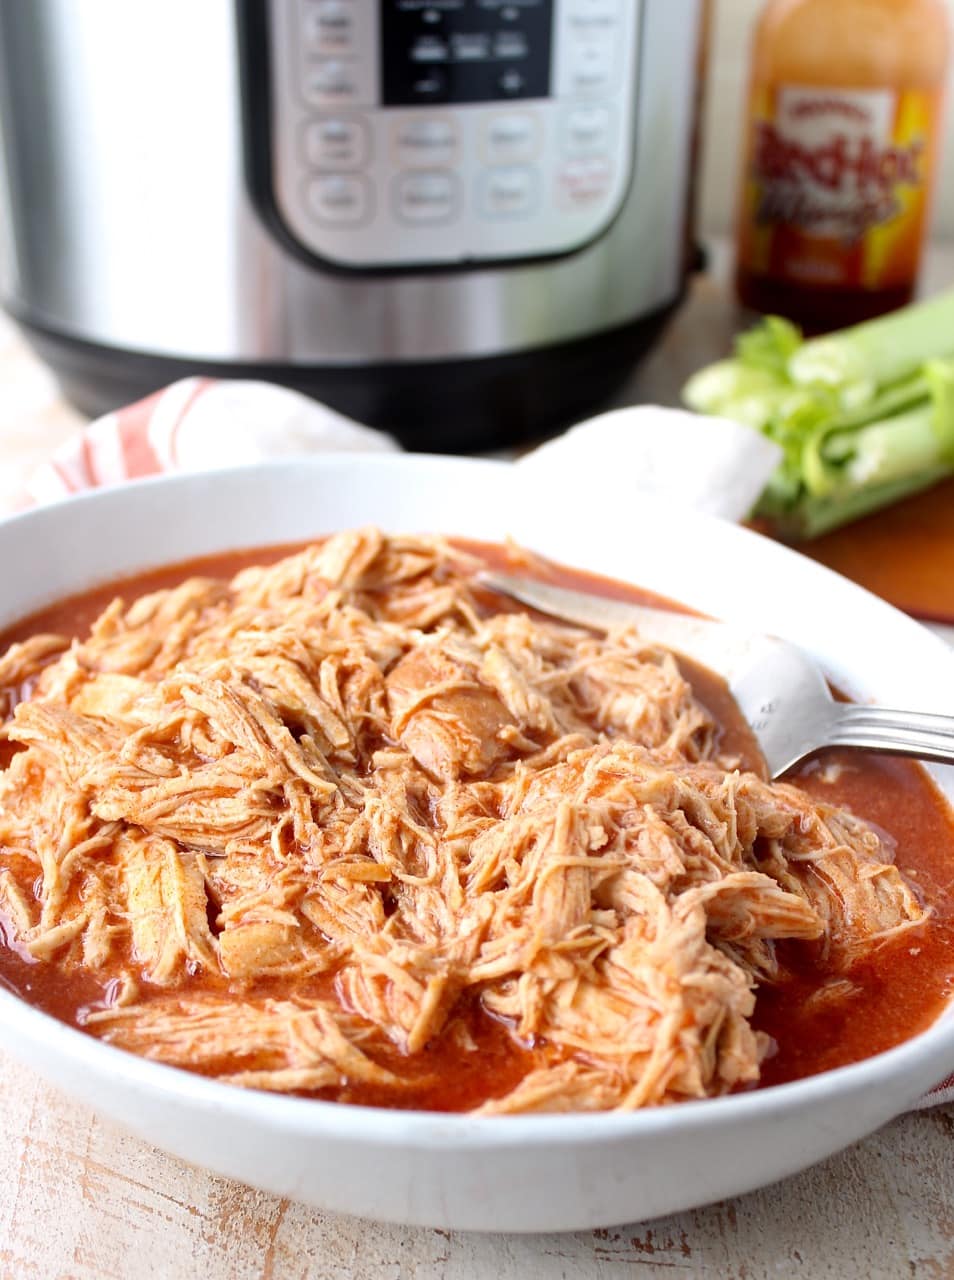 Easily make shredded buffalo chicken for tacos, dips or pasta recipes with this simple Instant Pot Buffalo Chicken recipe!